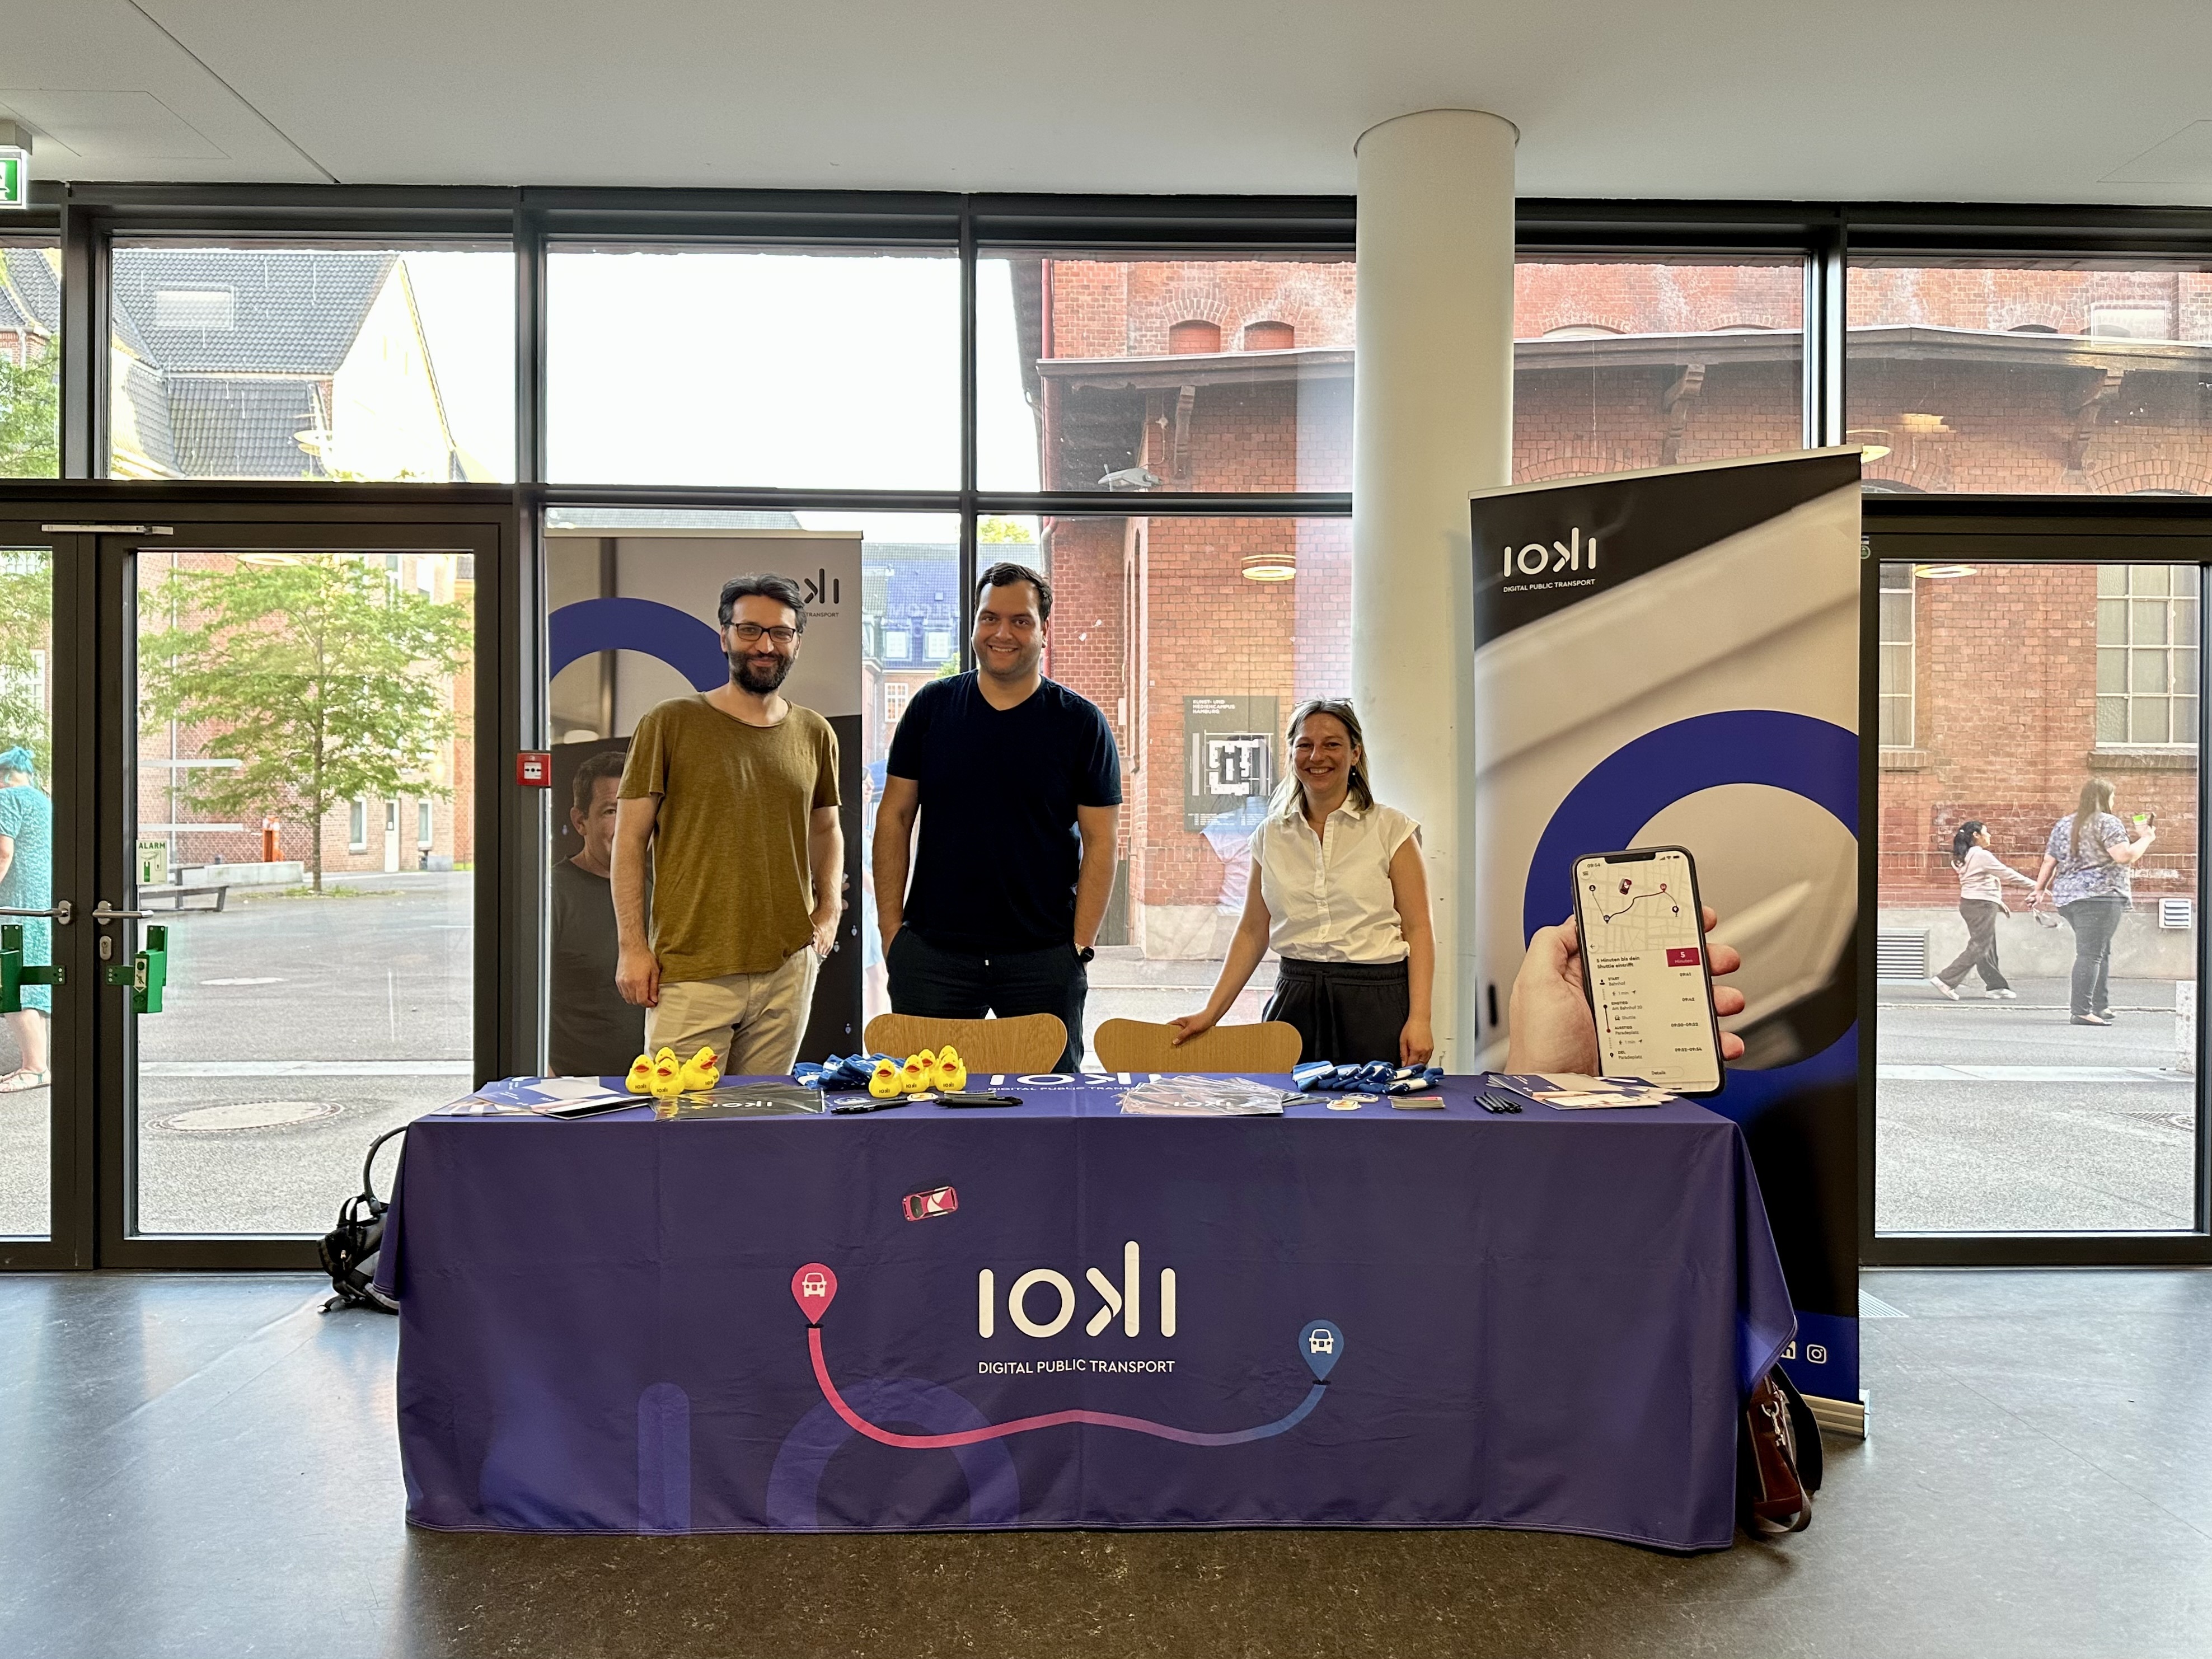 ioki's booth at the ruby unconf